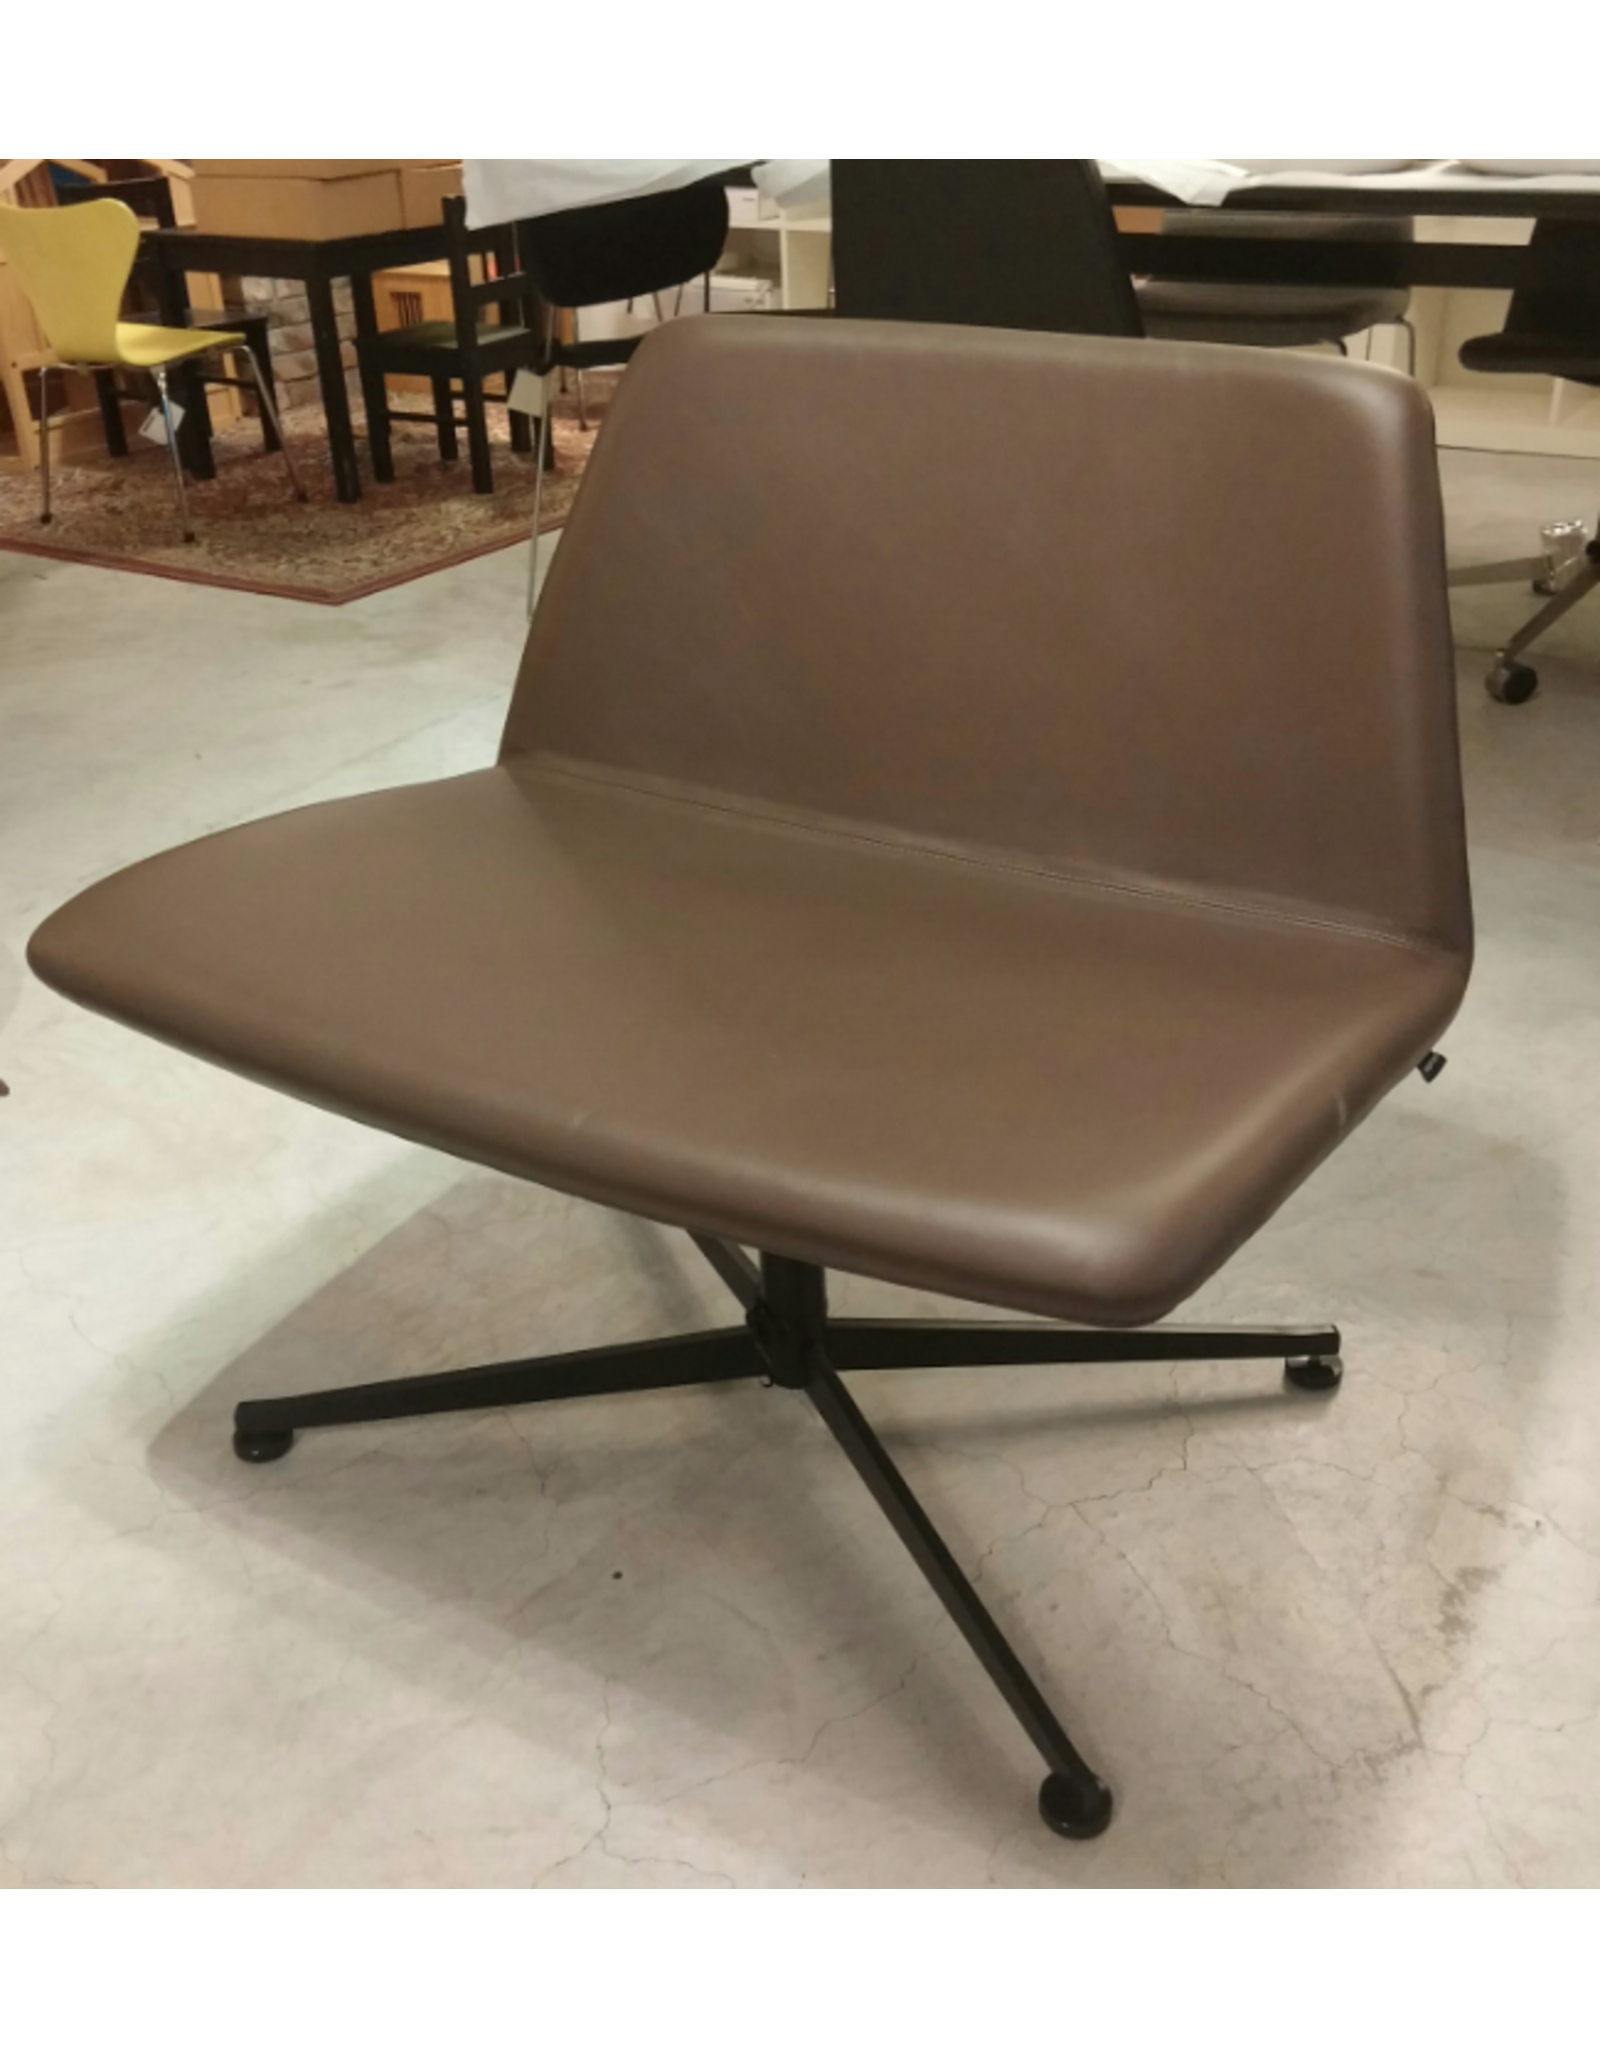 SPINAL 80 LOUNGE CHAIR ON SWIVEL RETURN BASE